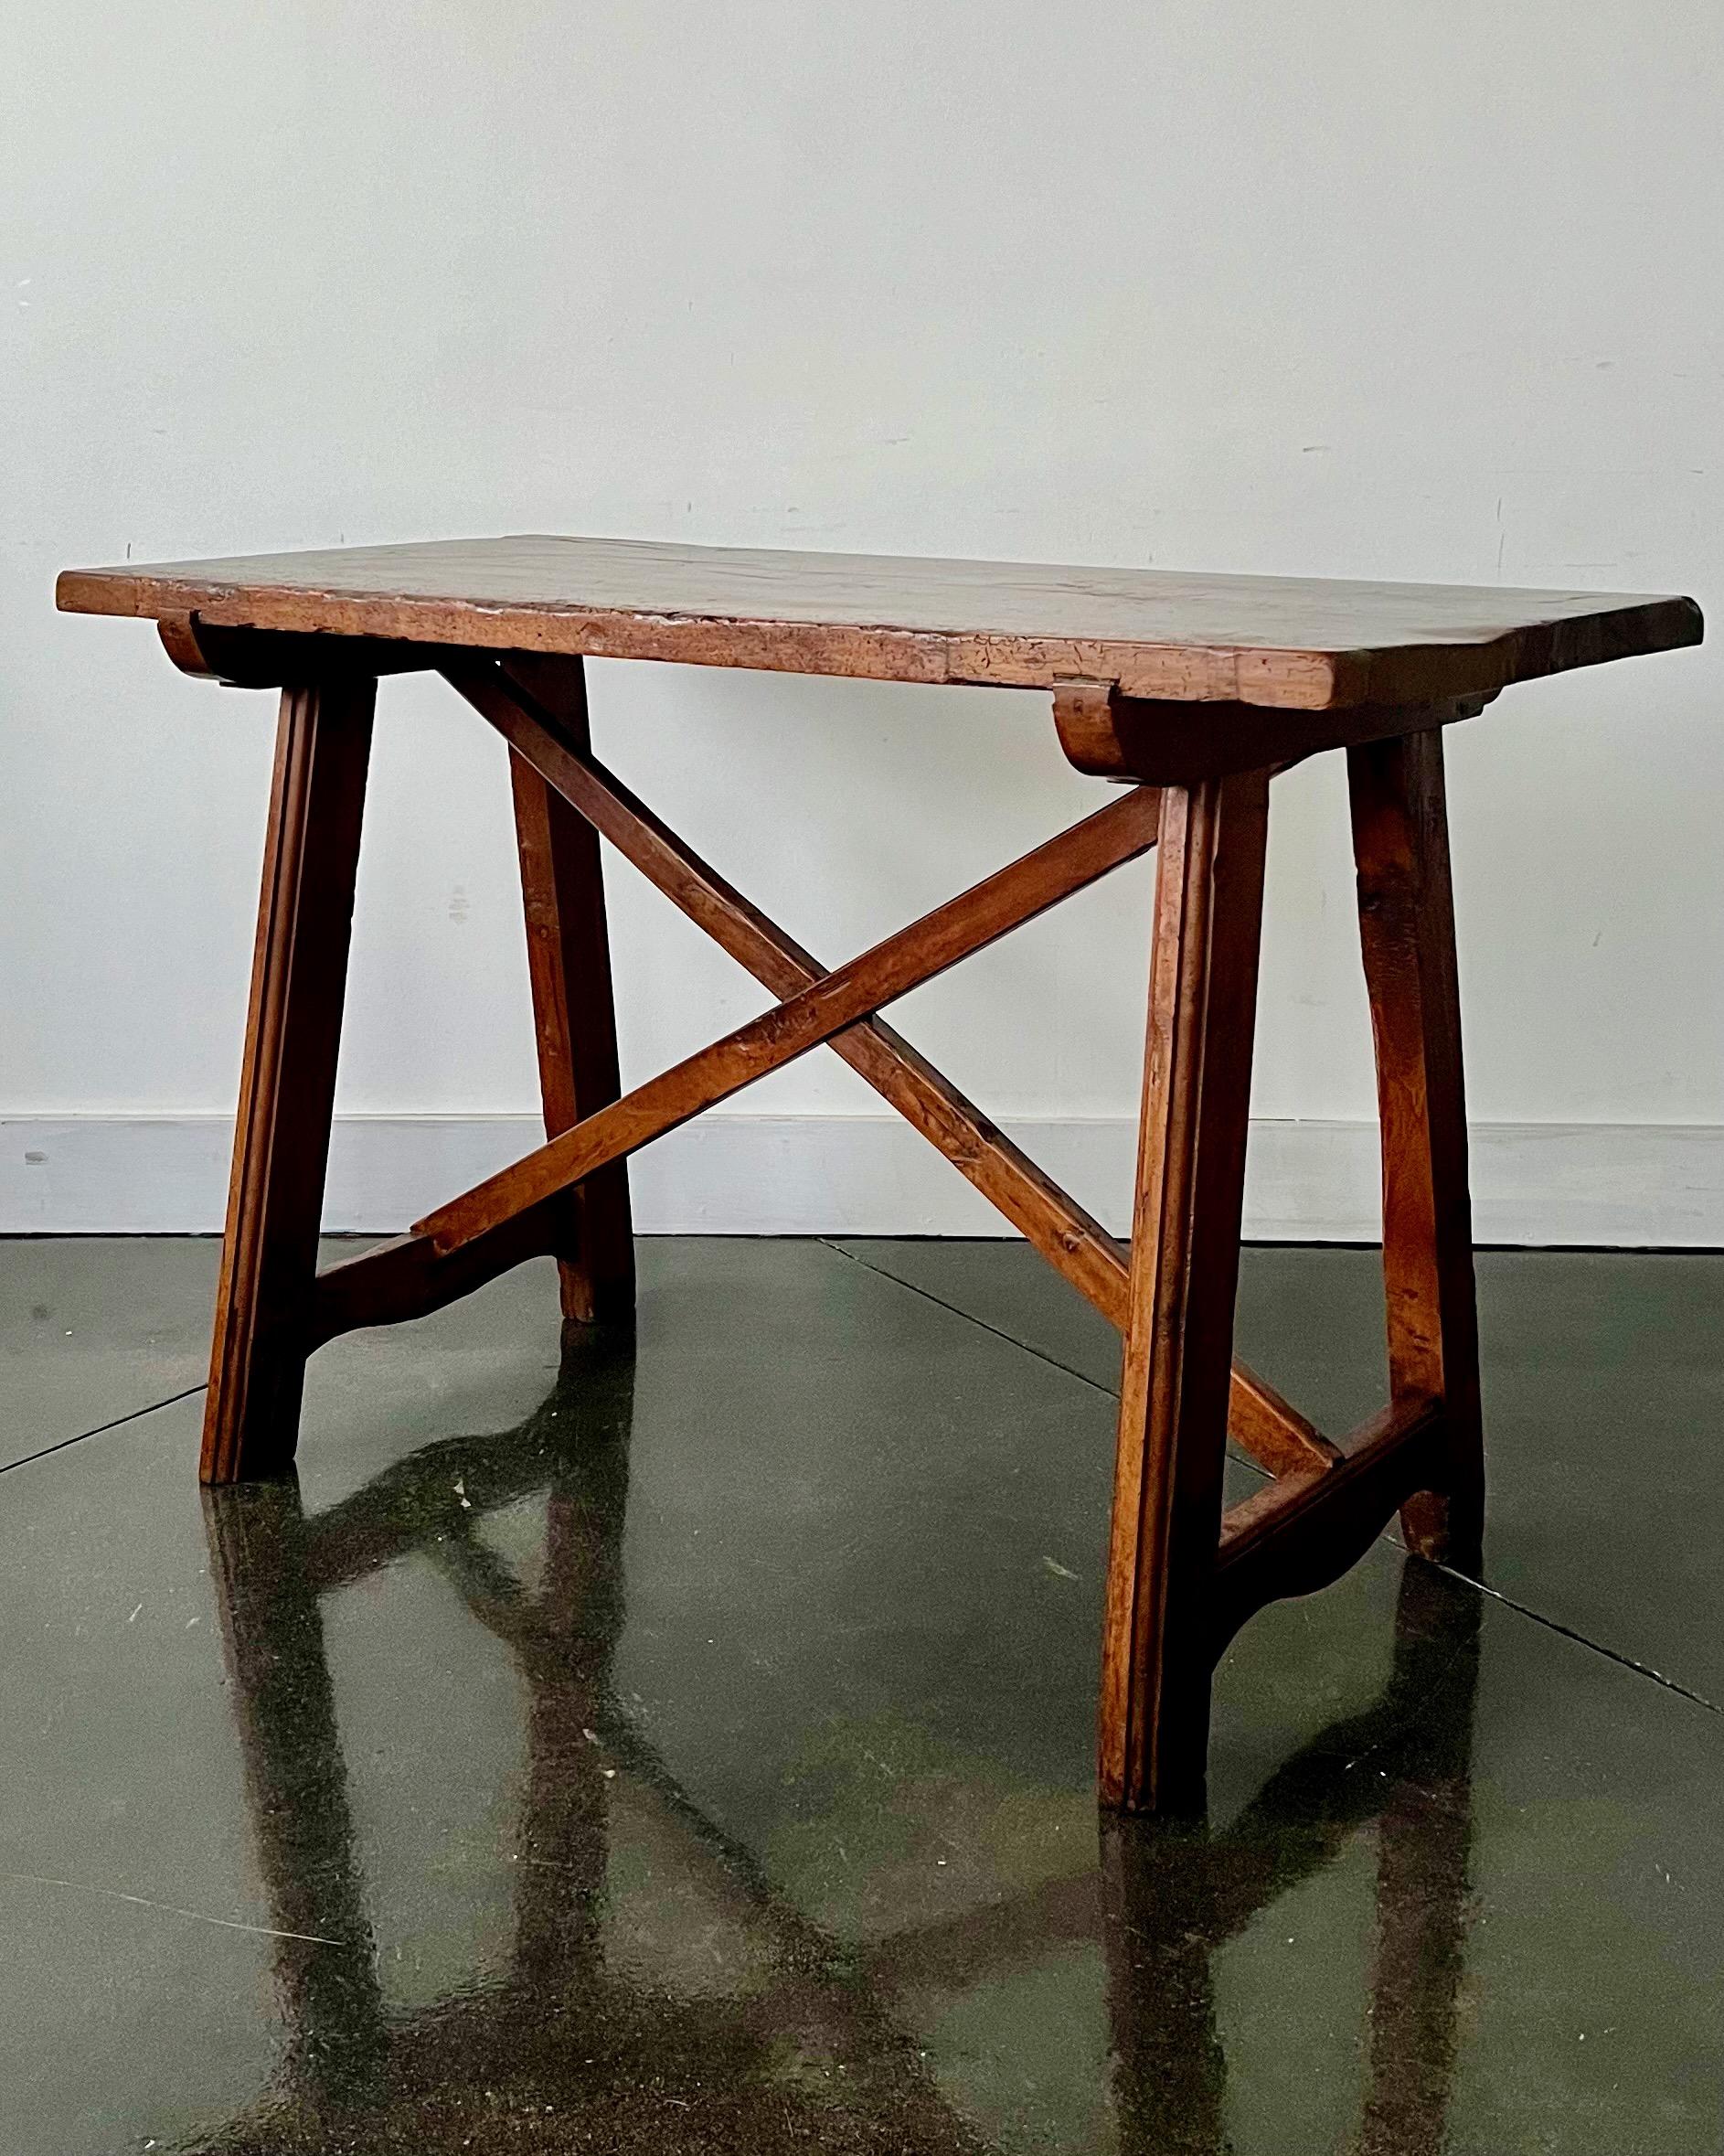 18th century Italian Baroque-style walnut side table .
Rectangle face with molded edge and raised on trestles and joined by strechere.